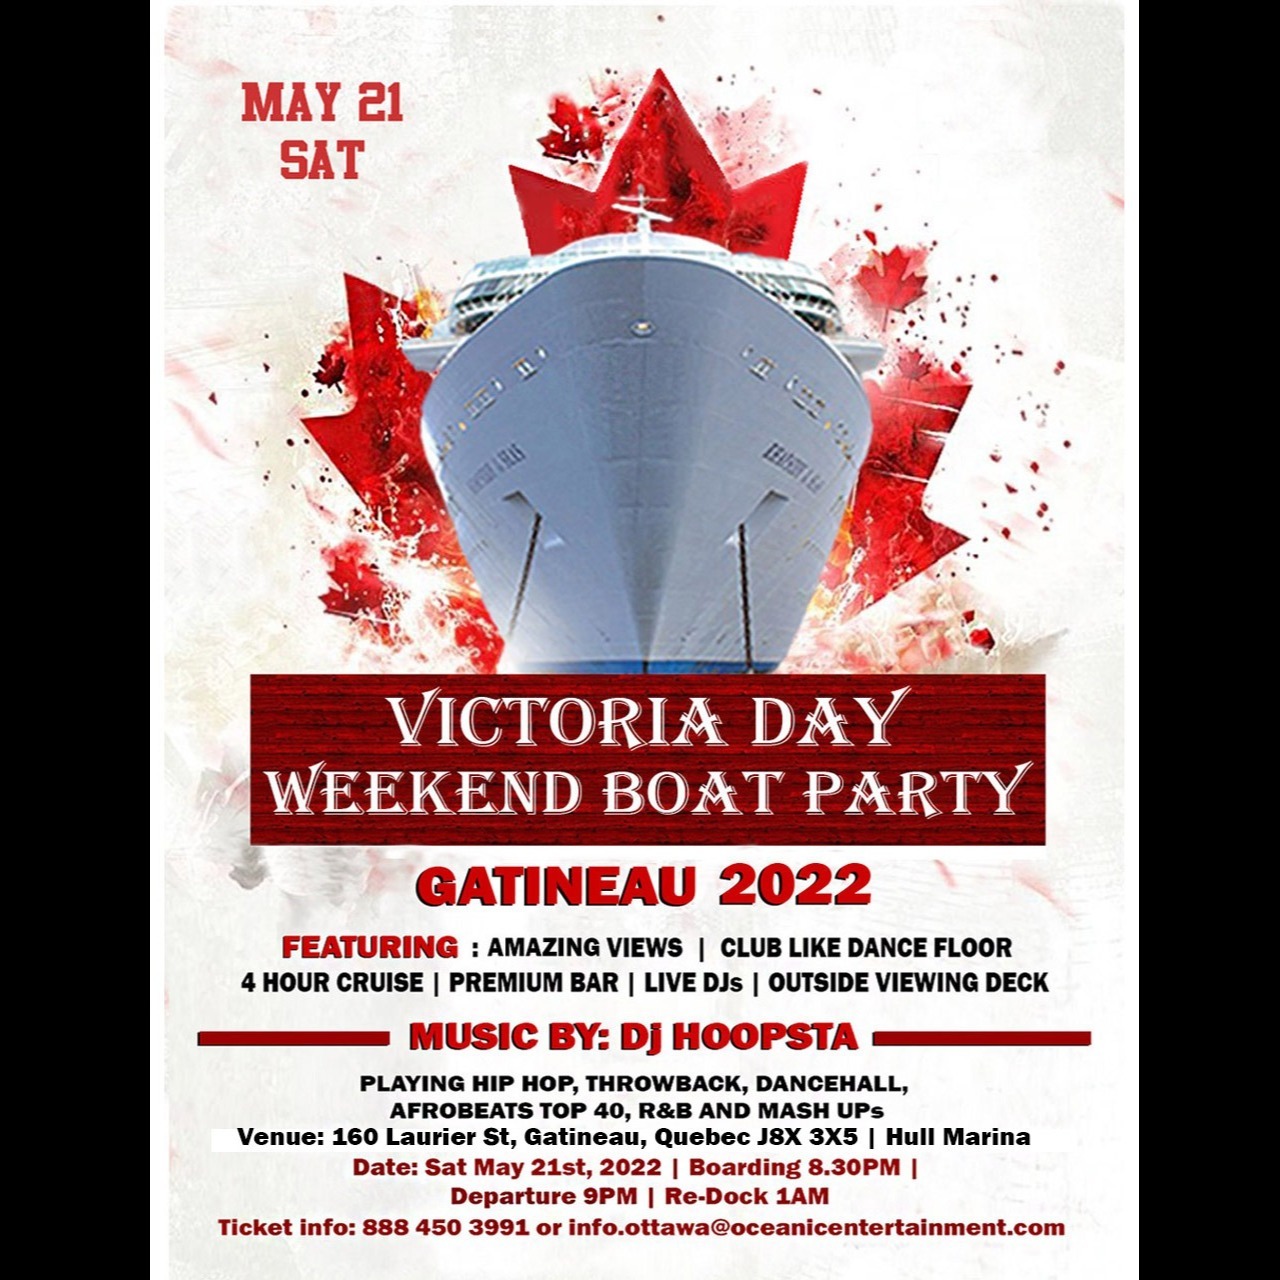 Victoria Day Weekend Boat Party Gatineau 2022